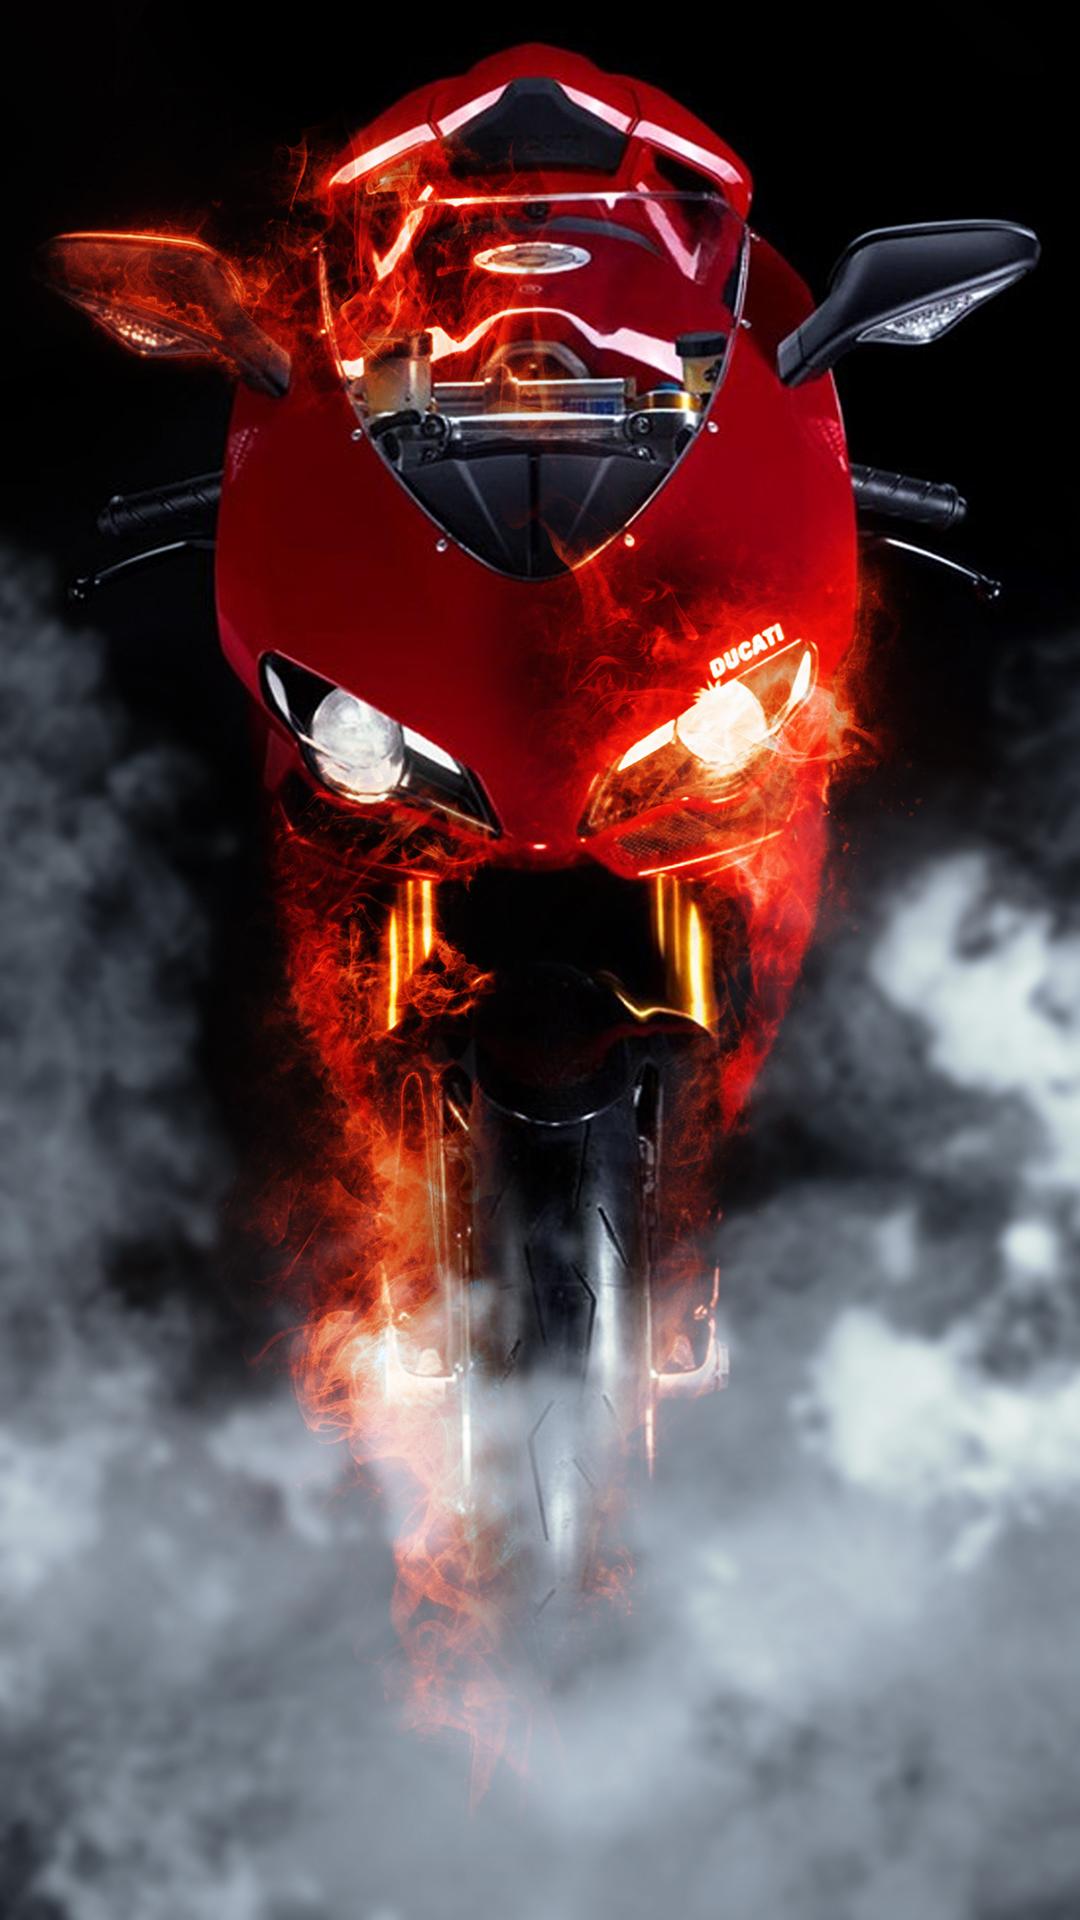 Motorcycle Background for Phones on .hipwallpaper.com